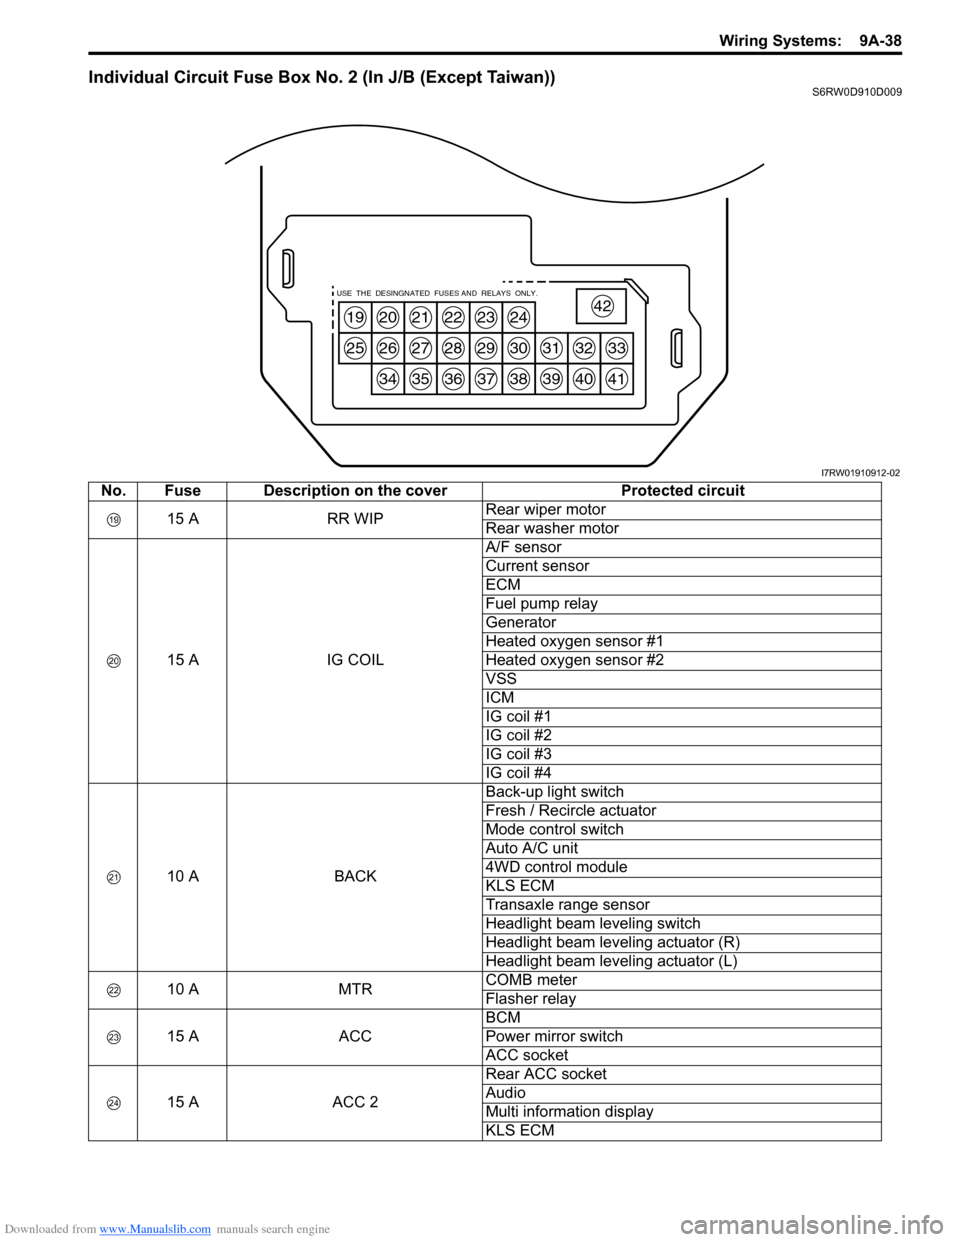 SUZUKI SX4 2006 1.G Service Workshop Manual Downloaded from www.Manualslib.com manuals search engine Wiring Systems:  9A-38
Individual Circuit Fuse Box No. 2 (In J/B (Except Taiwan))S6RW0D910D009
19
25
20
26
34
21
27
35
22
28
36
23
29
37
24
30
